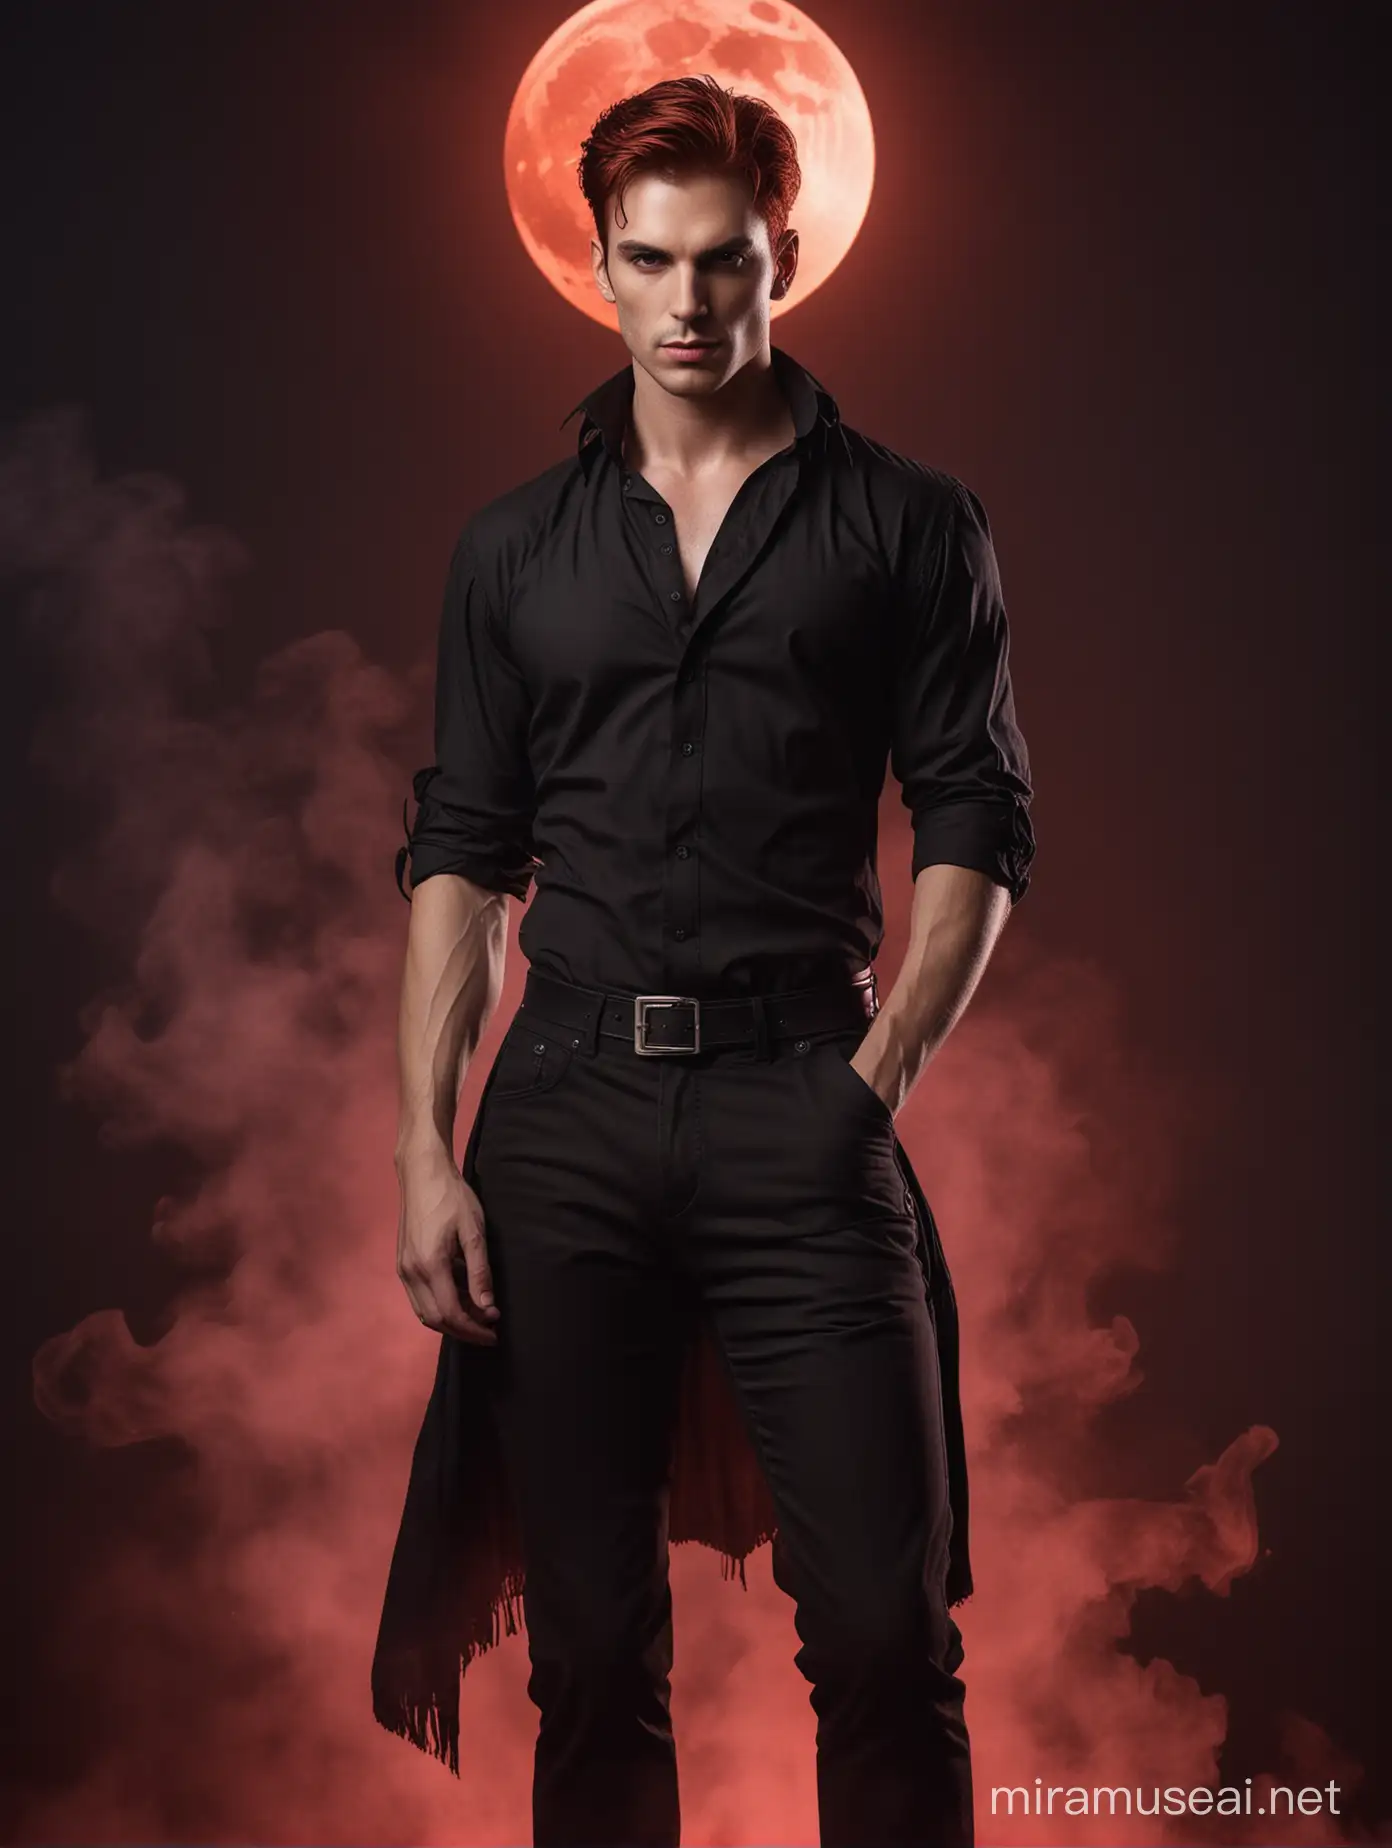 Intense Vampire Man Under Red Moon with Red Smoke